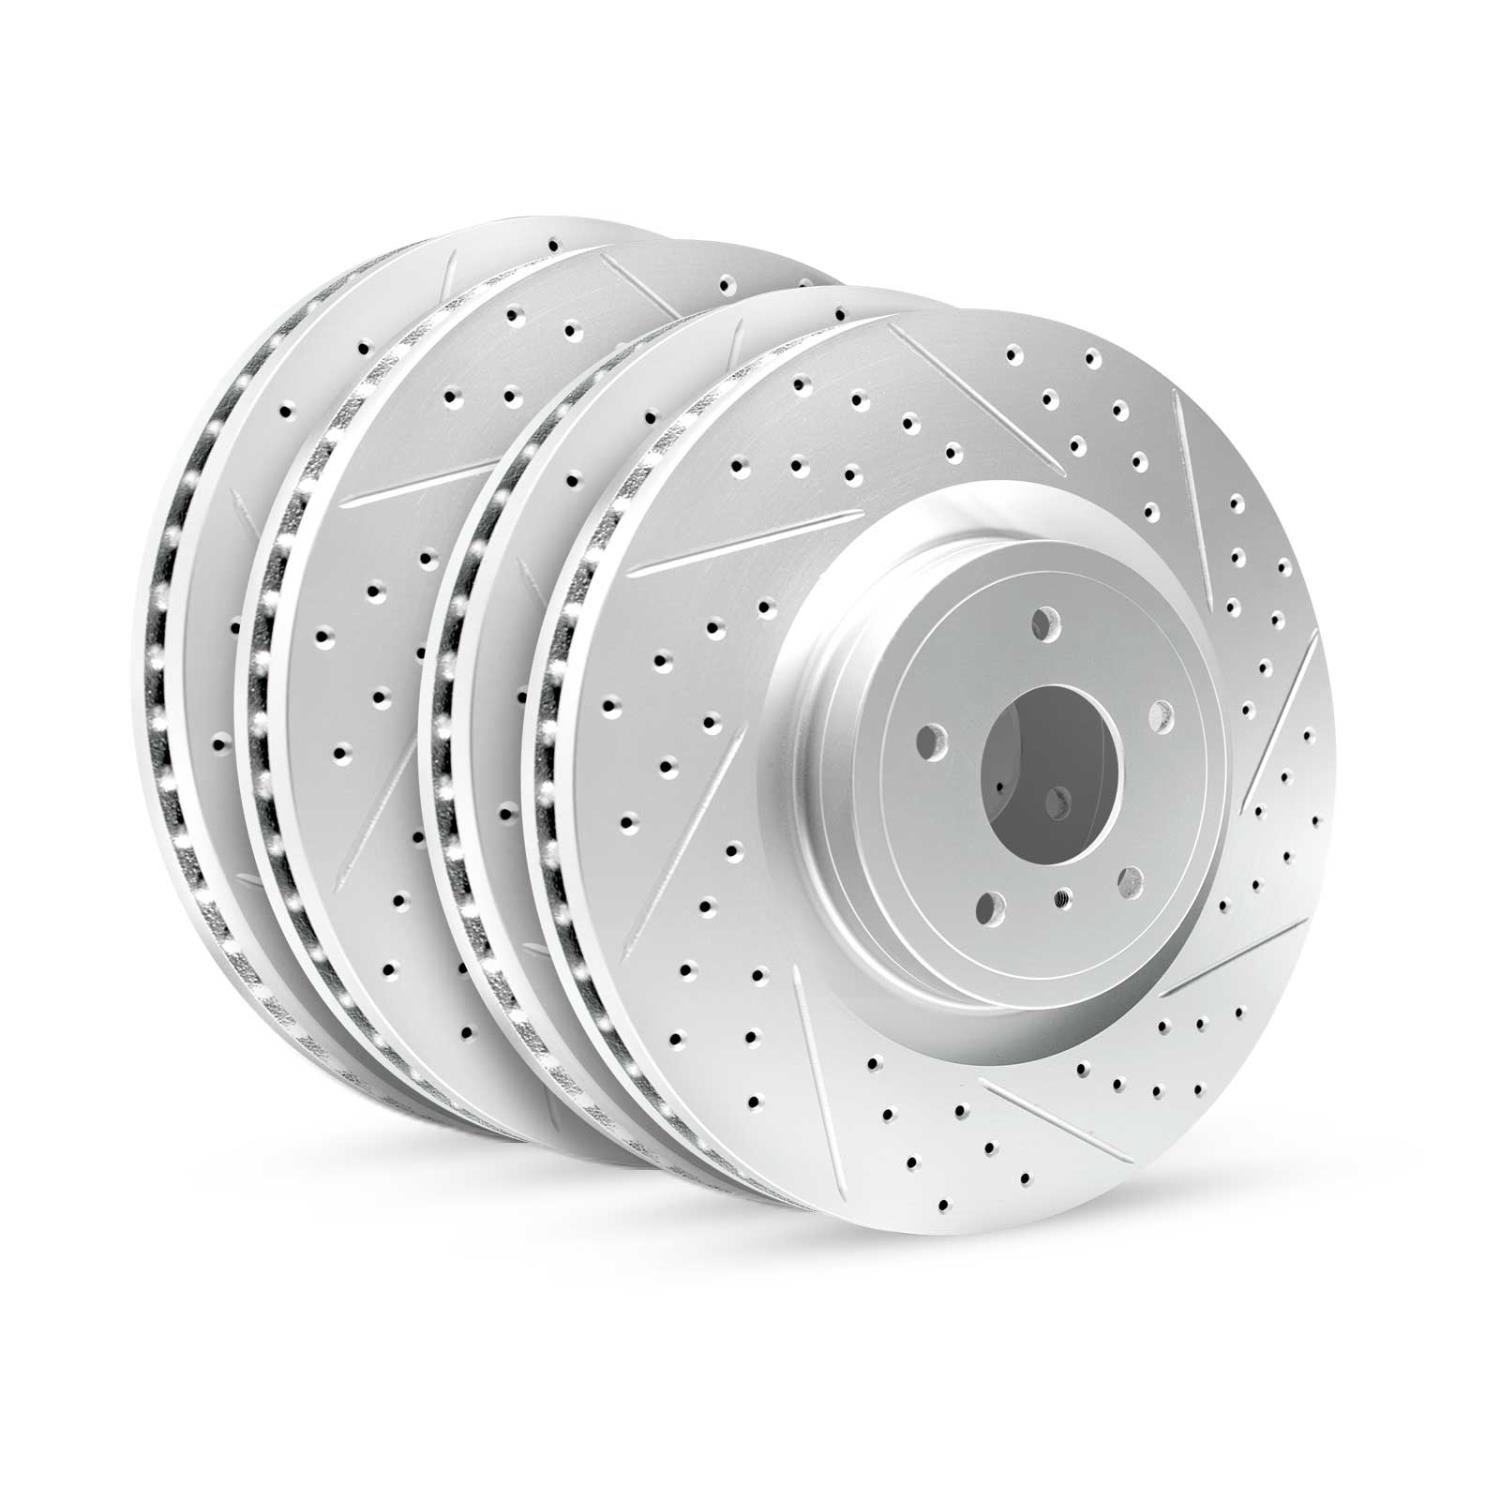 GEO-Carbon Drilled/Slotted Rotors, 1991-2001 BMW, Position: Front/Rear